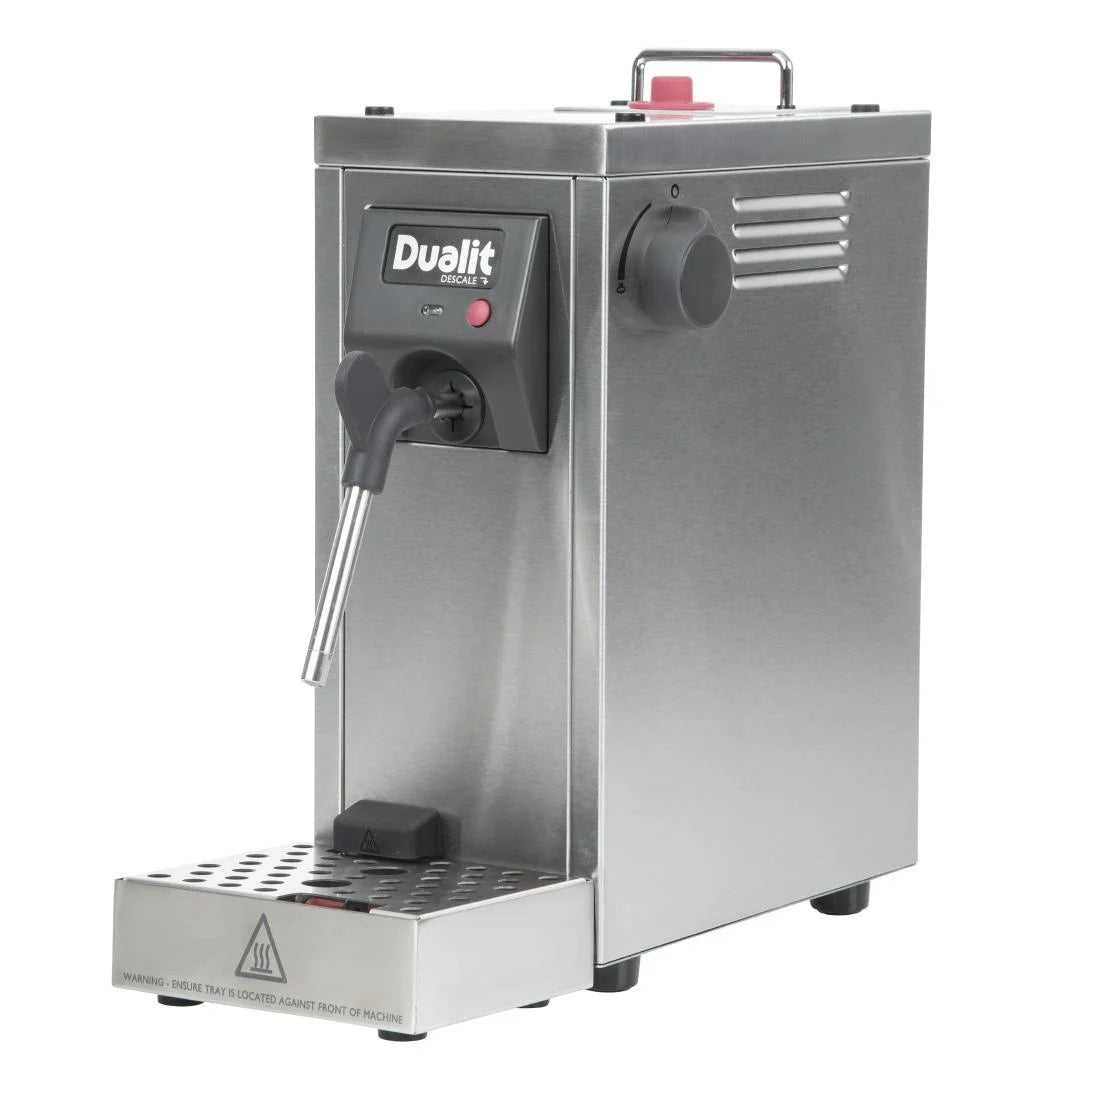 Dualit Cino Milk Frother.Product Ref:00565.MODEL:CN452.🚚 3-5 Days Delivery